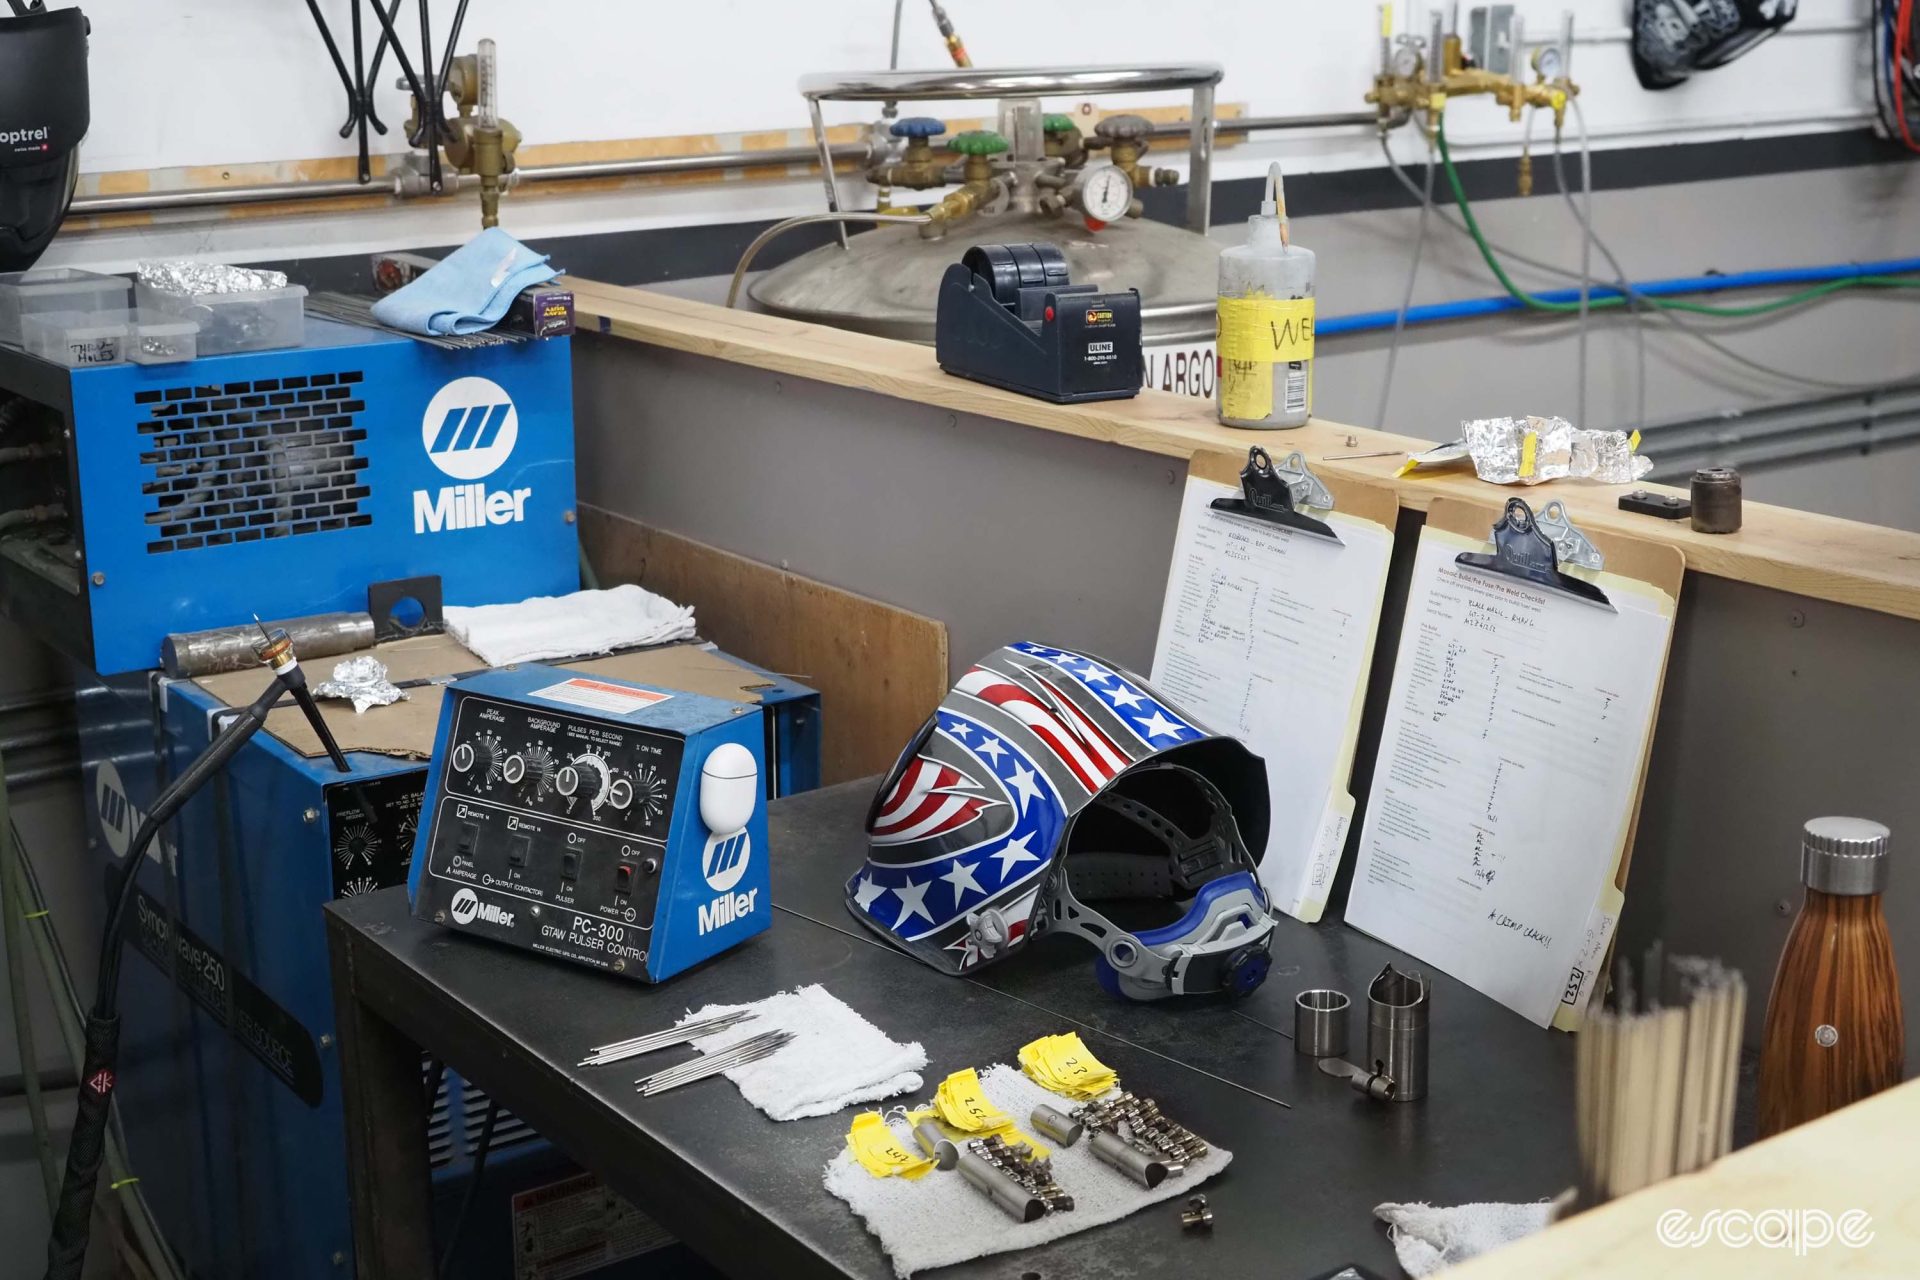 A neat and orderly welding station with a welding control module, mask, tungsten rod and small parts along with the order sheet.